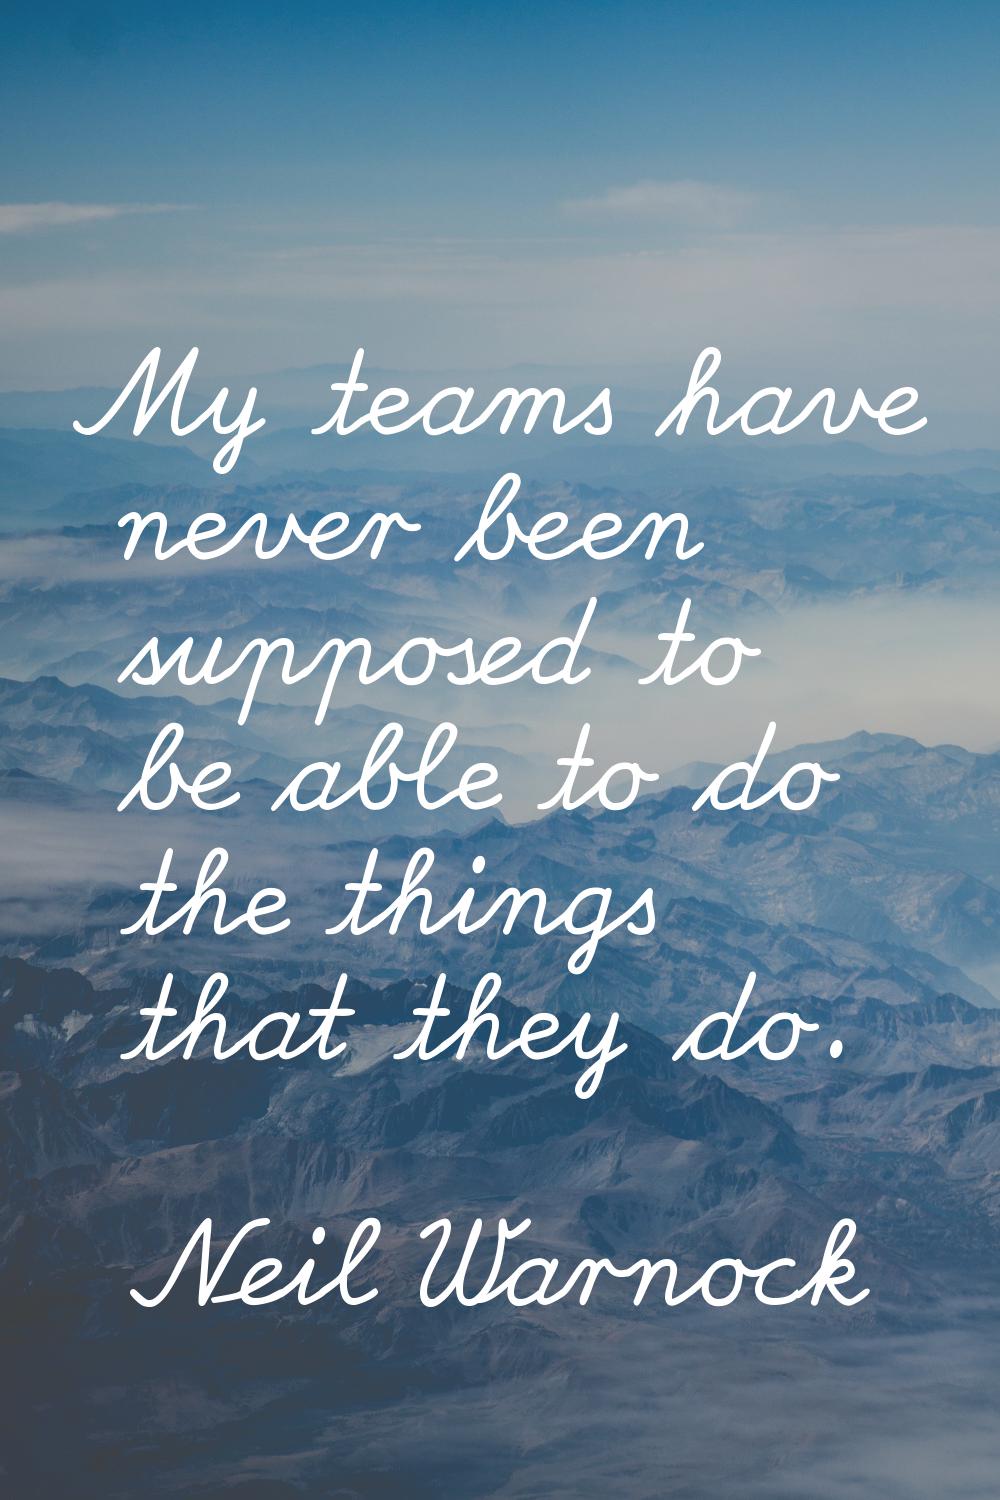 My teams have never been supposed to be able to do the things that they do.